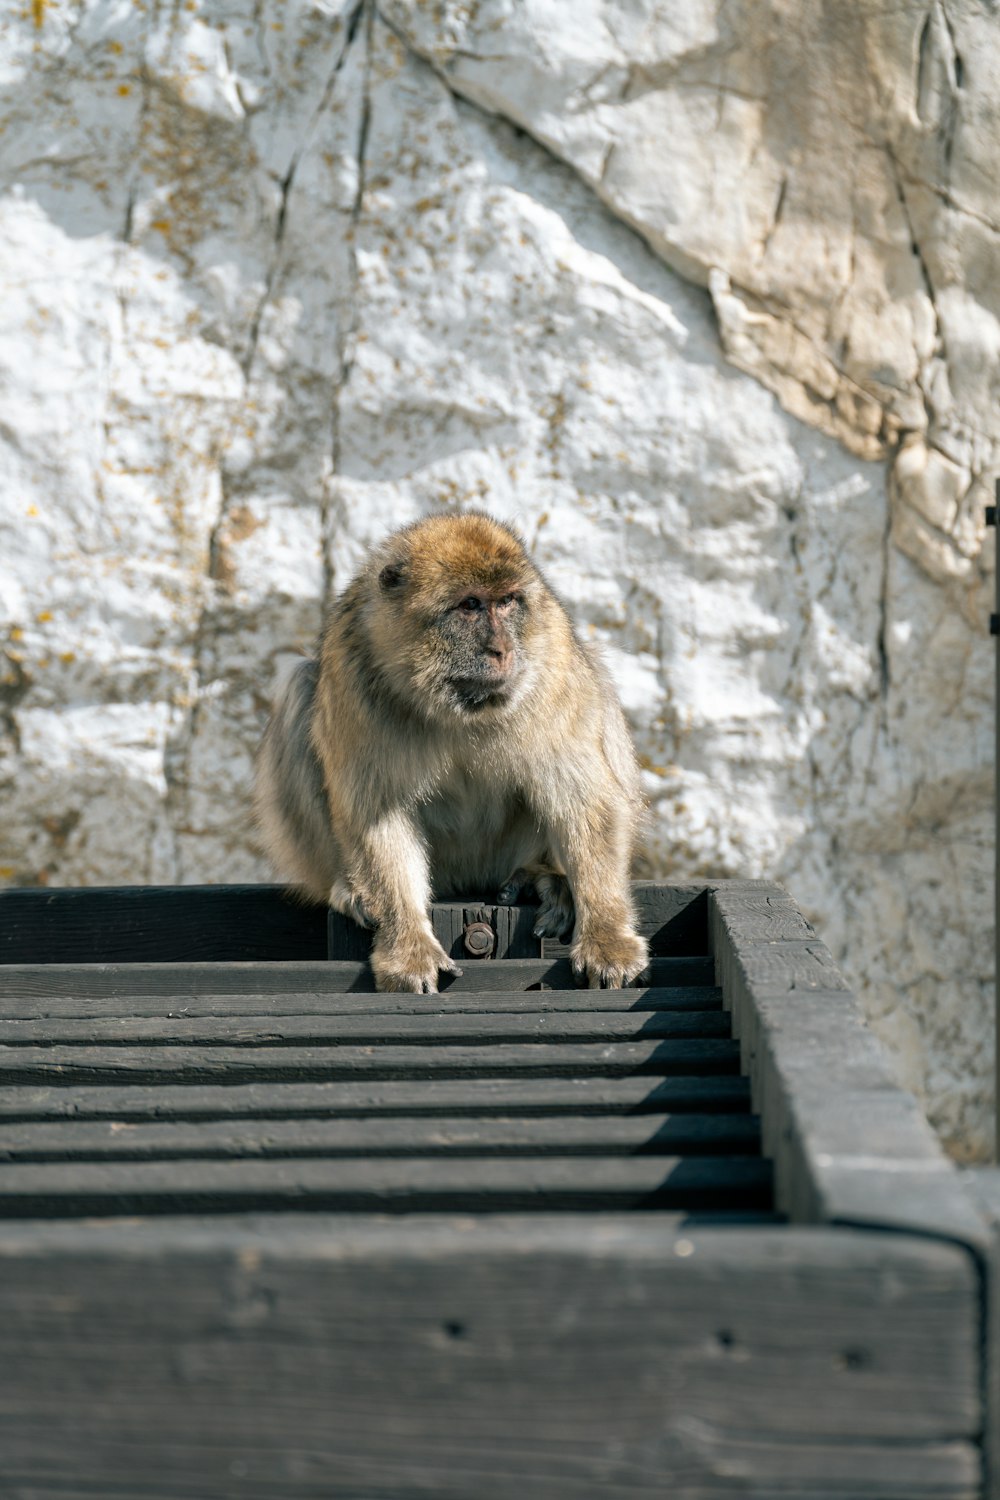 a small brown monkey standing on top of a wooden platform